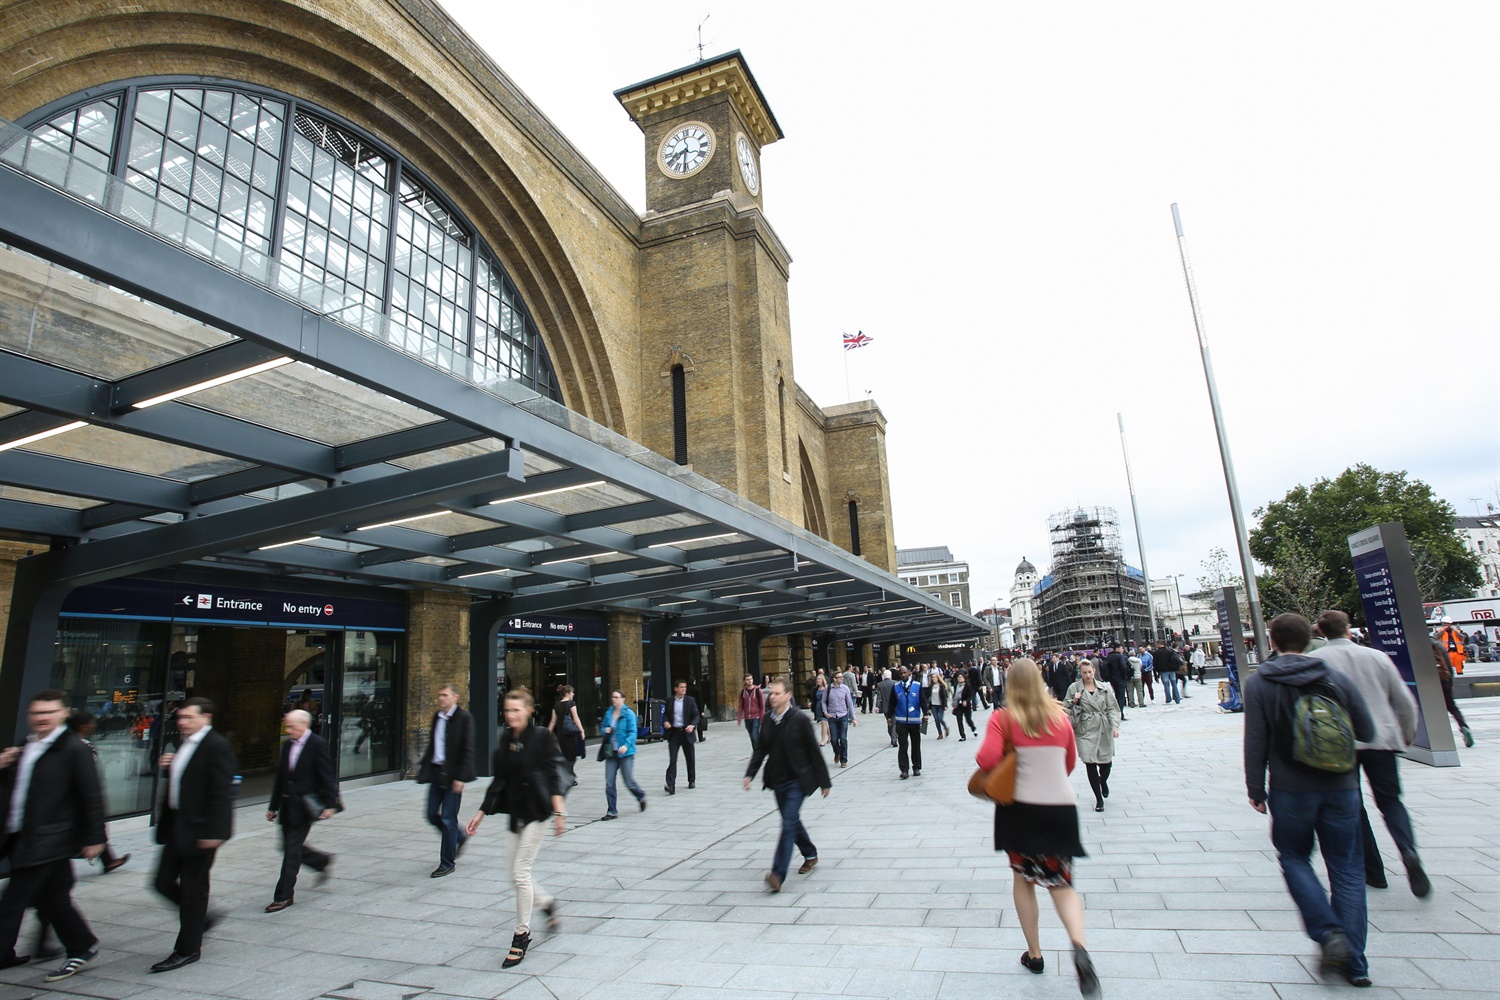 Row over Network Rail’s future worsens as campaign launched to stop station sales